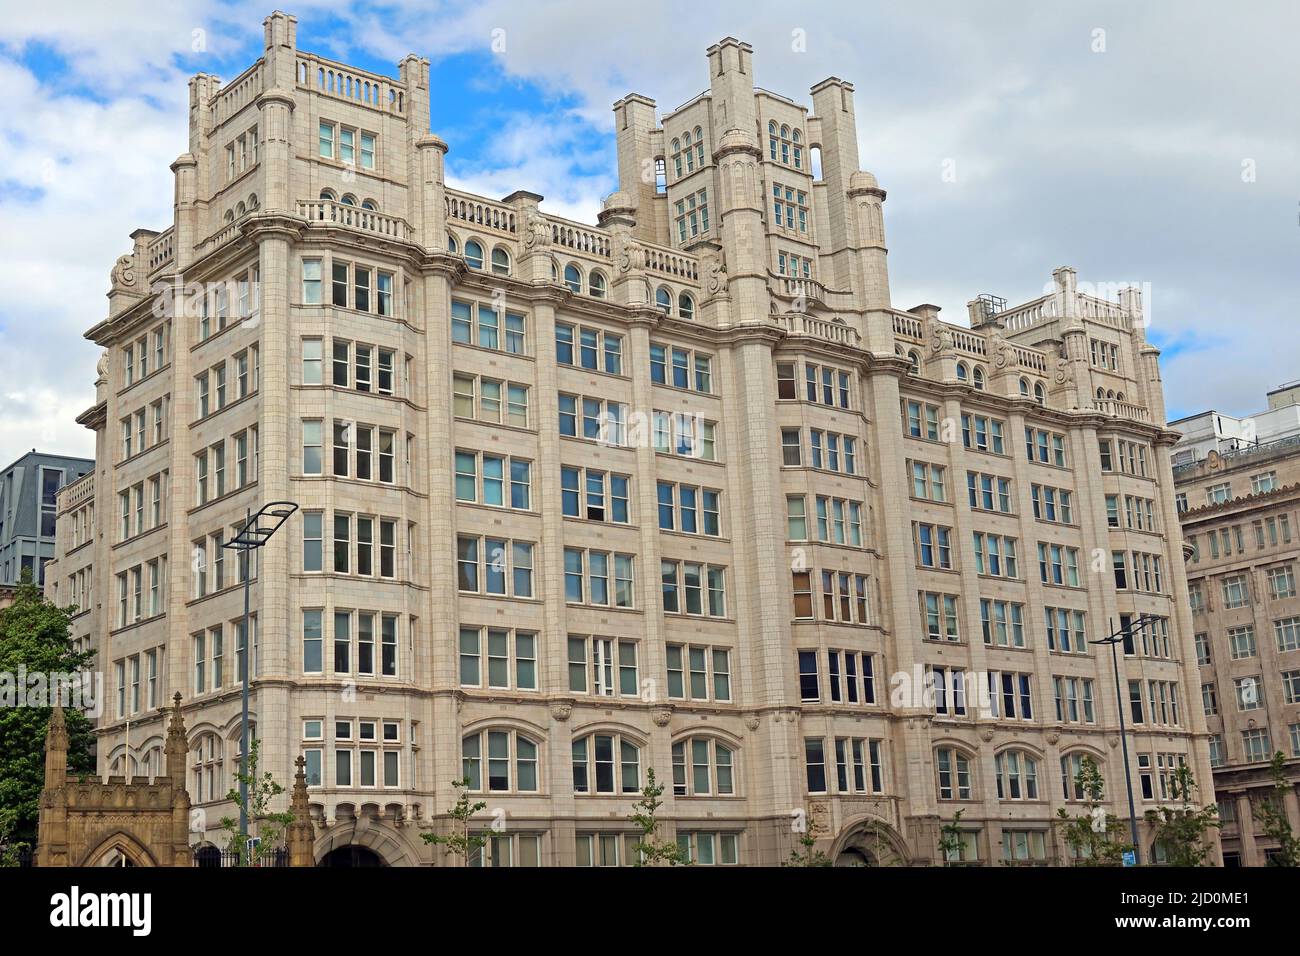 The Liverpool Tower Buildings 1908, at 3 Tower Gardens, Liverpool, Merseyside, England, UK, L3 1LG Stock Photo